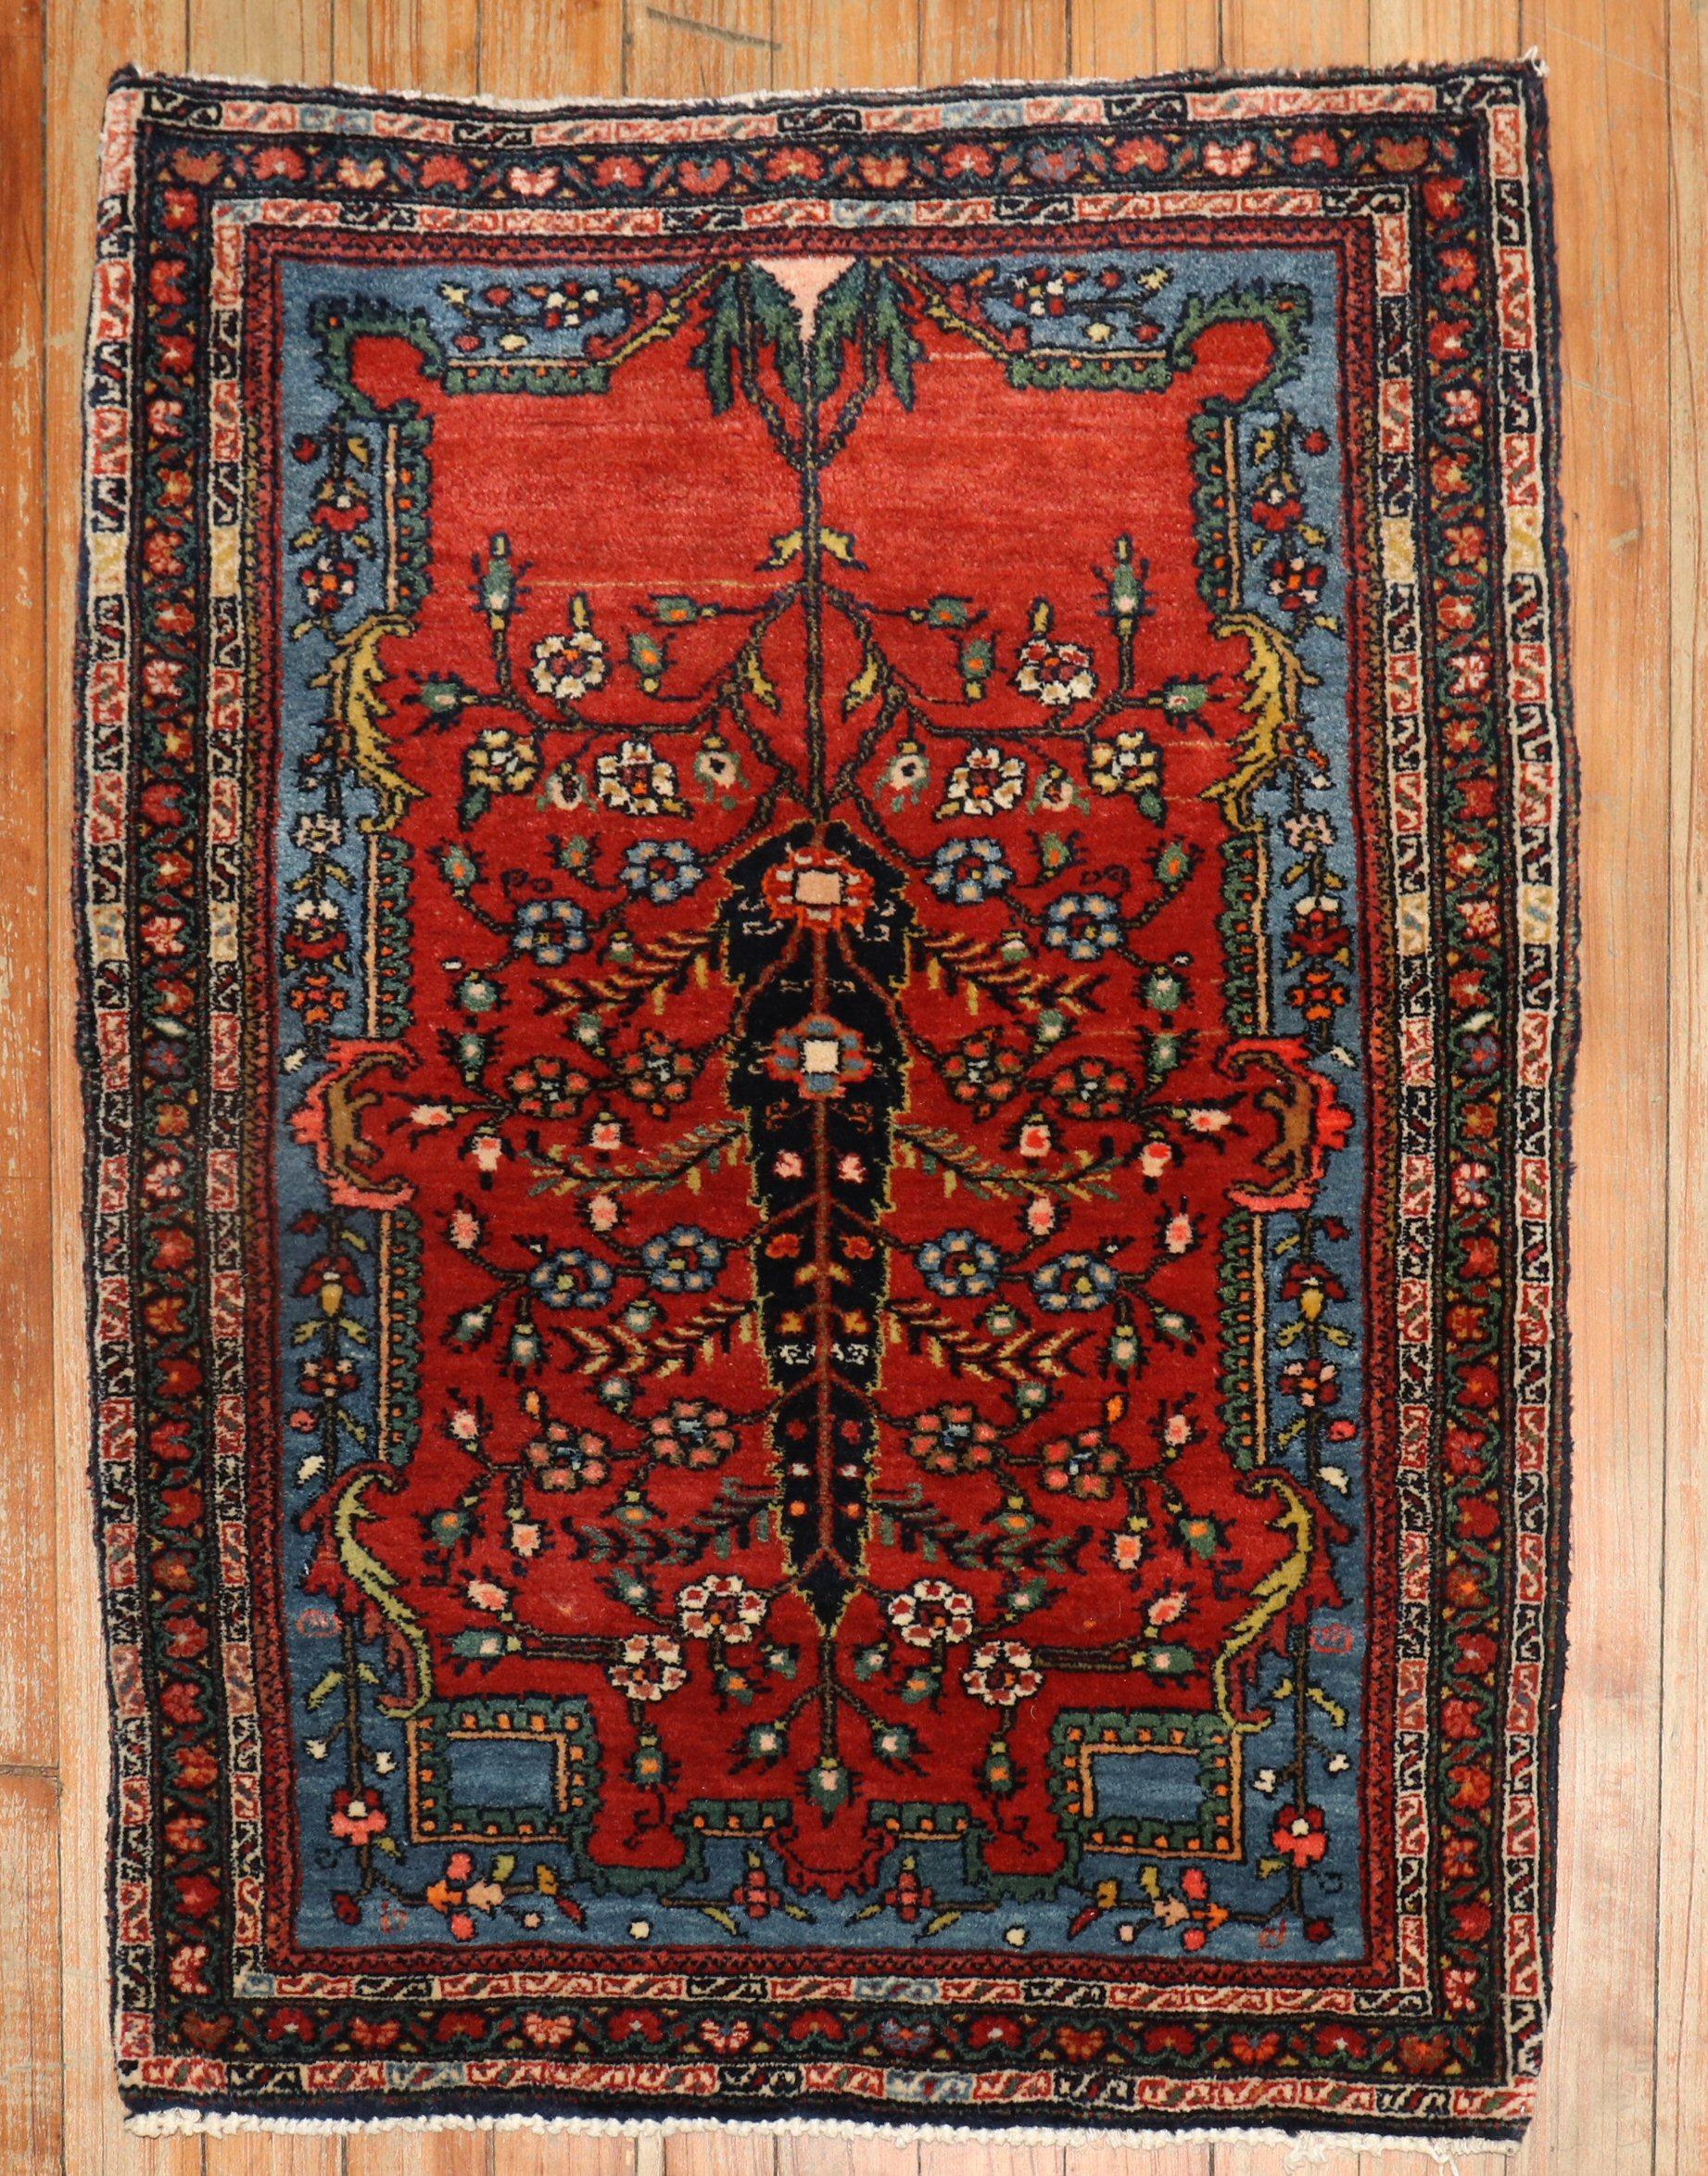 An early 20th century high collectible Jozan Sarouk rug with an ornate palette in rich brick red and navy tones

Measures: 1'11' x 2'7”.

